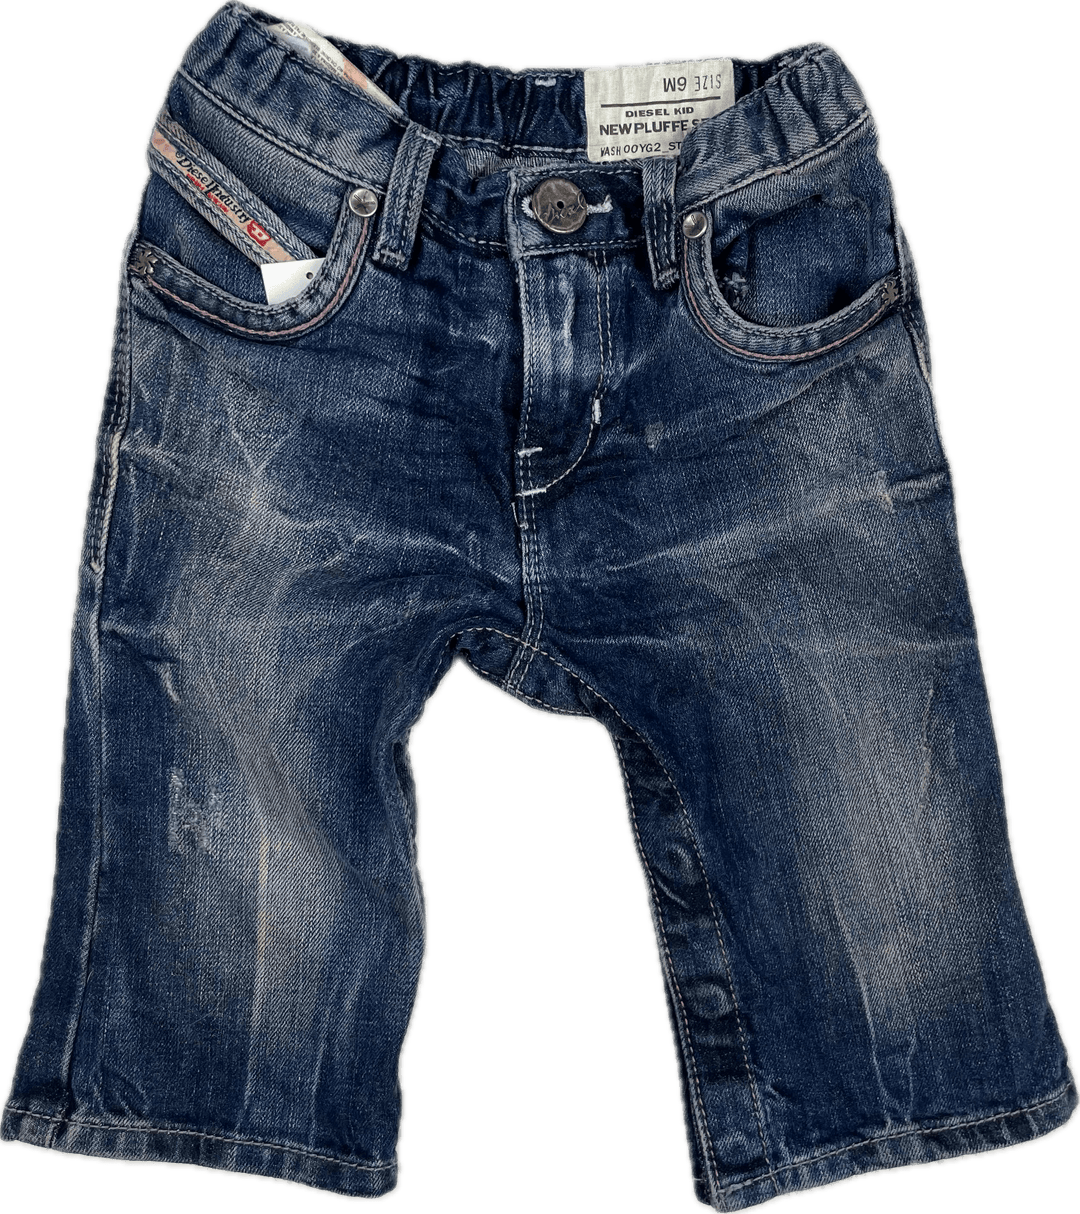 Diesel Distressed 'NEW FLUFFE SP1' Baby Jeans - Size 6M - Jean Pool